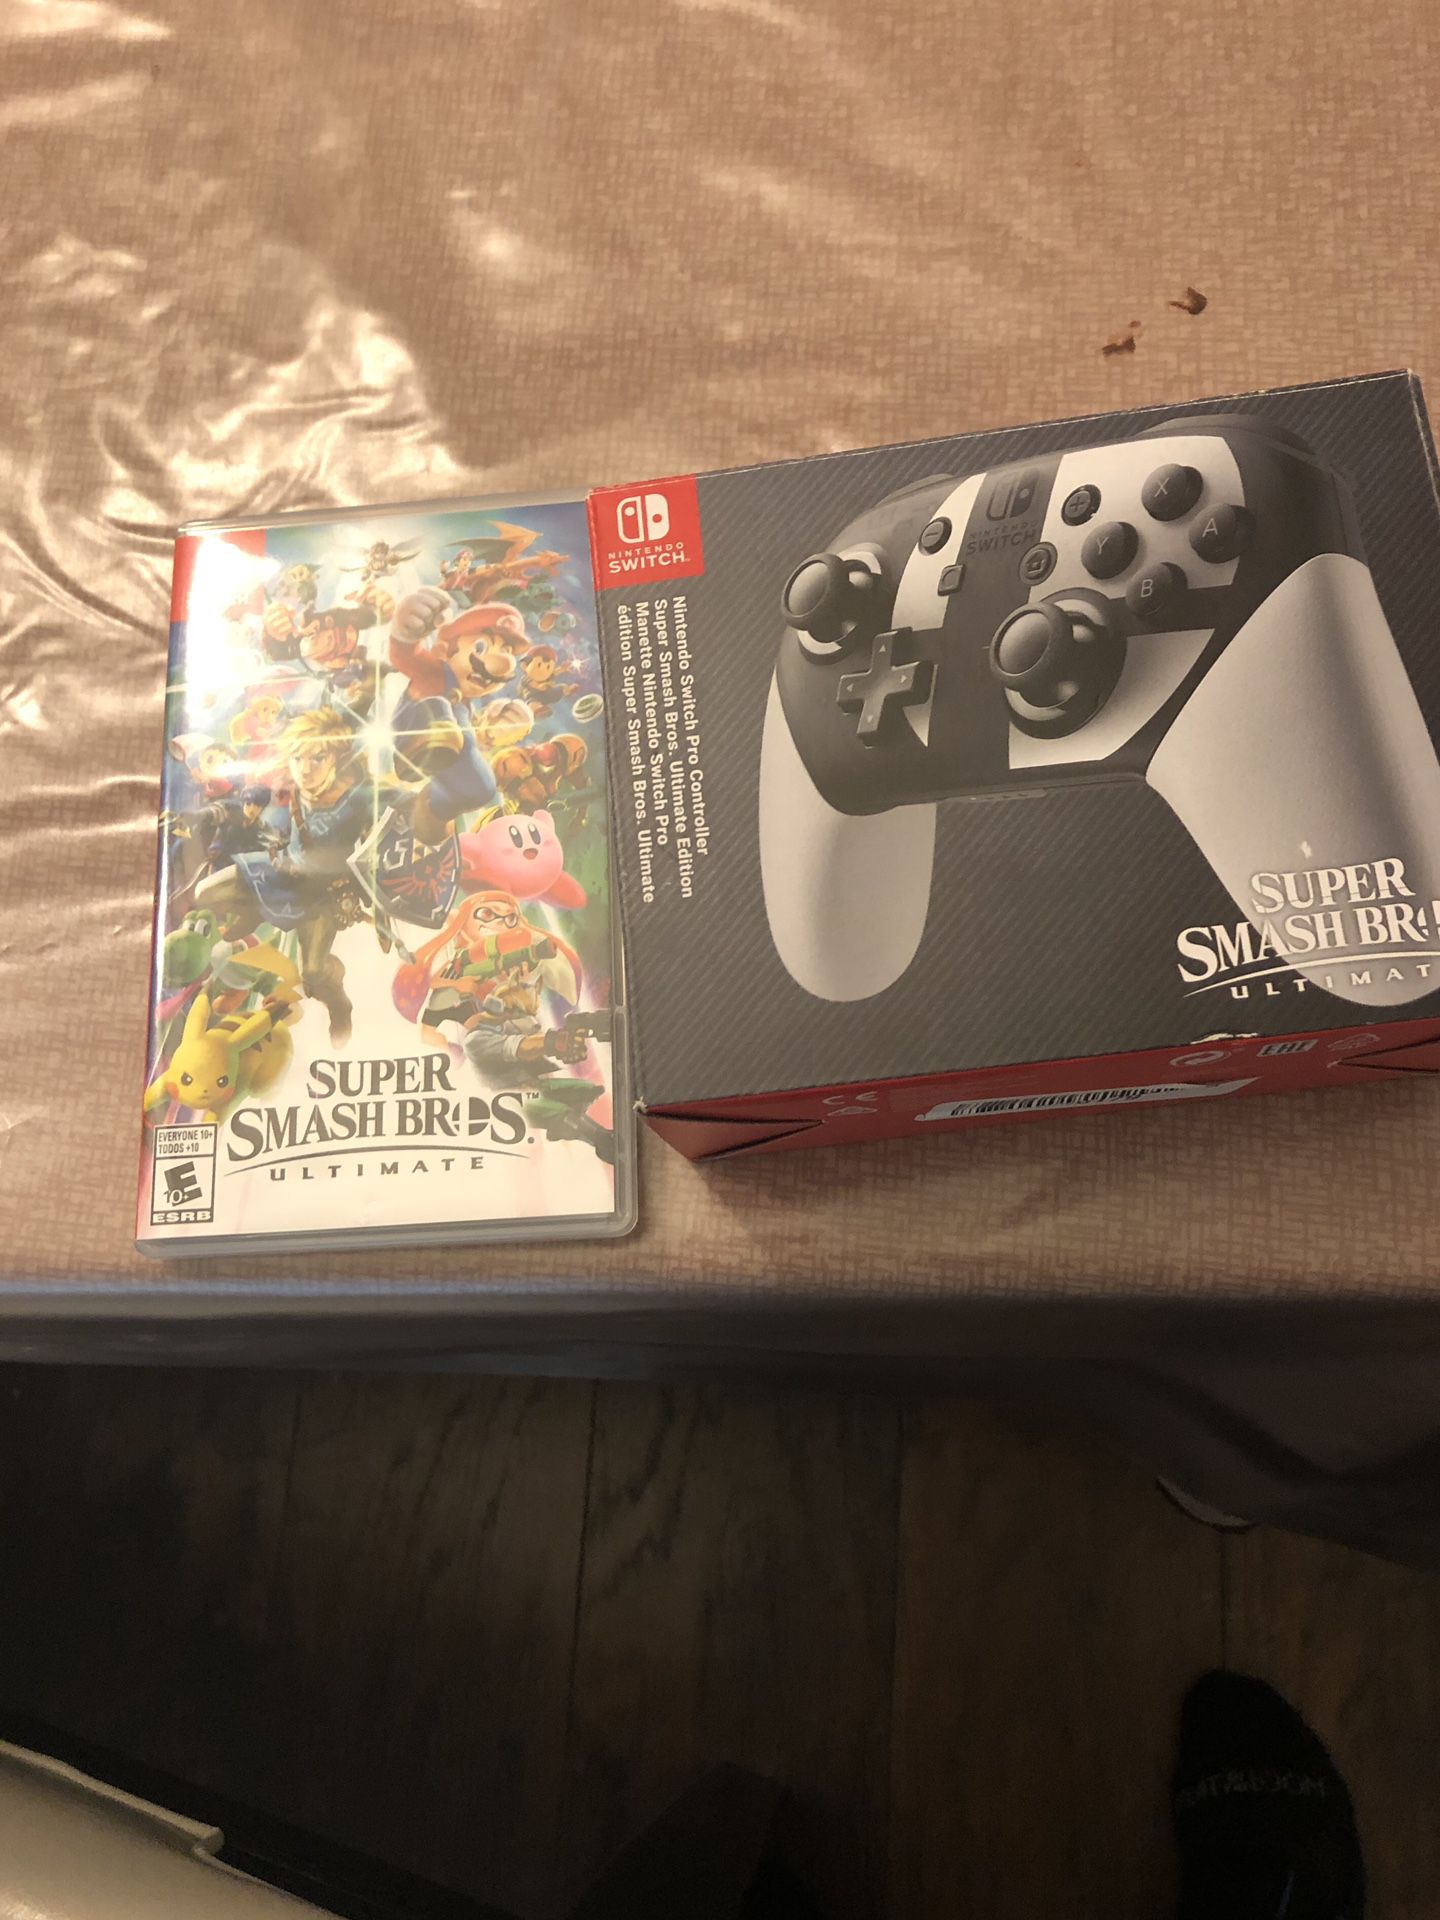 Nintendo Swich combo special Edition Super Smash Bros Game and controller special edition. Brand new